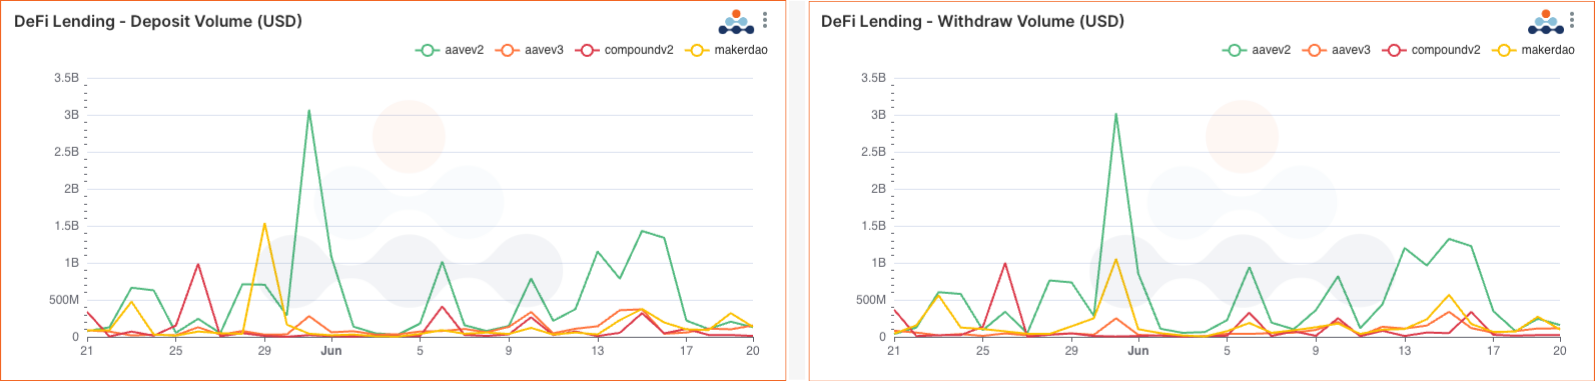 DeFi Lending protocol deposit, withdraw, borrow, and repay volumes over the last 30 days. Deposit volume withdraw volumes USD